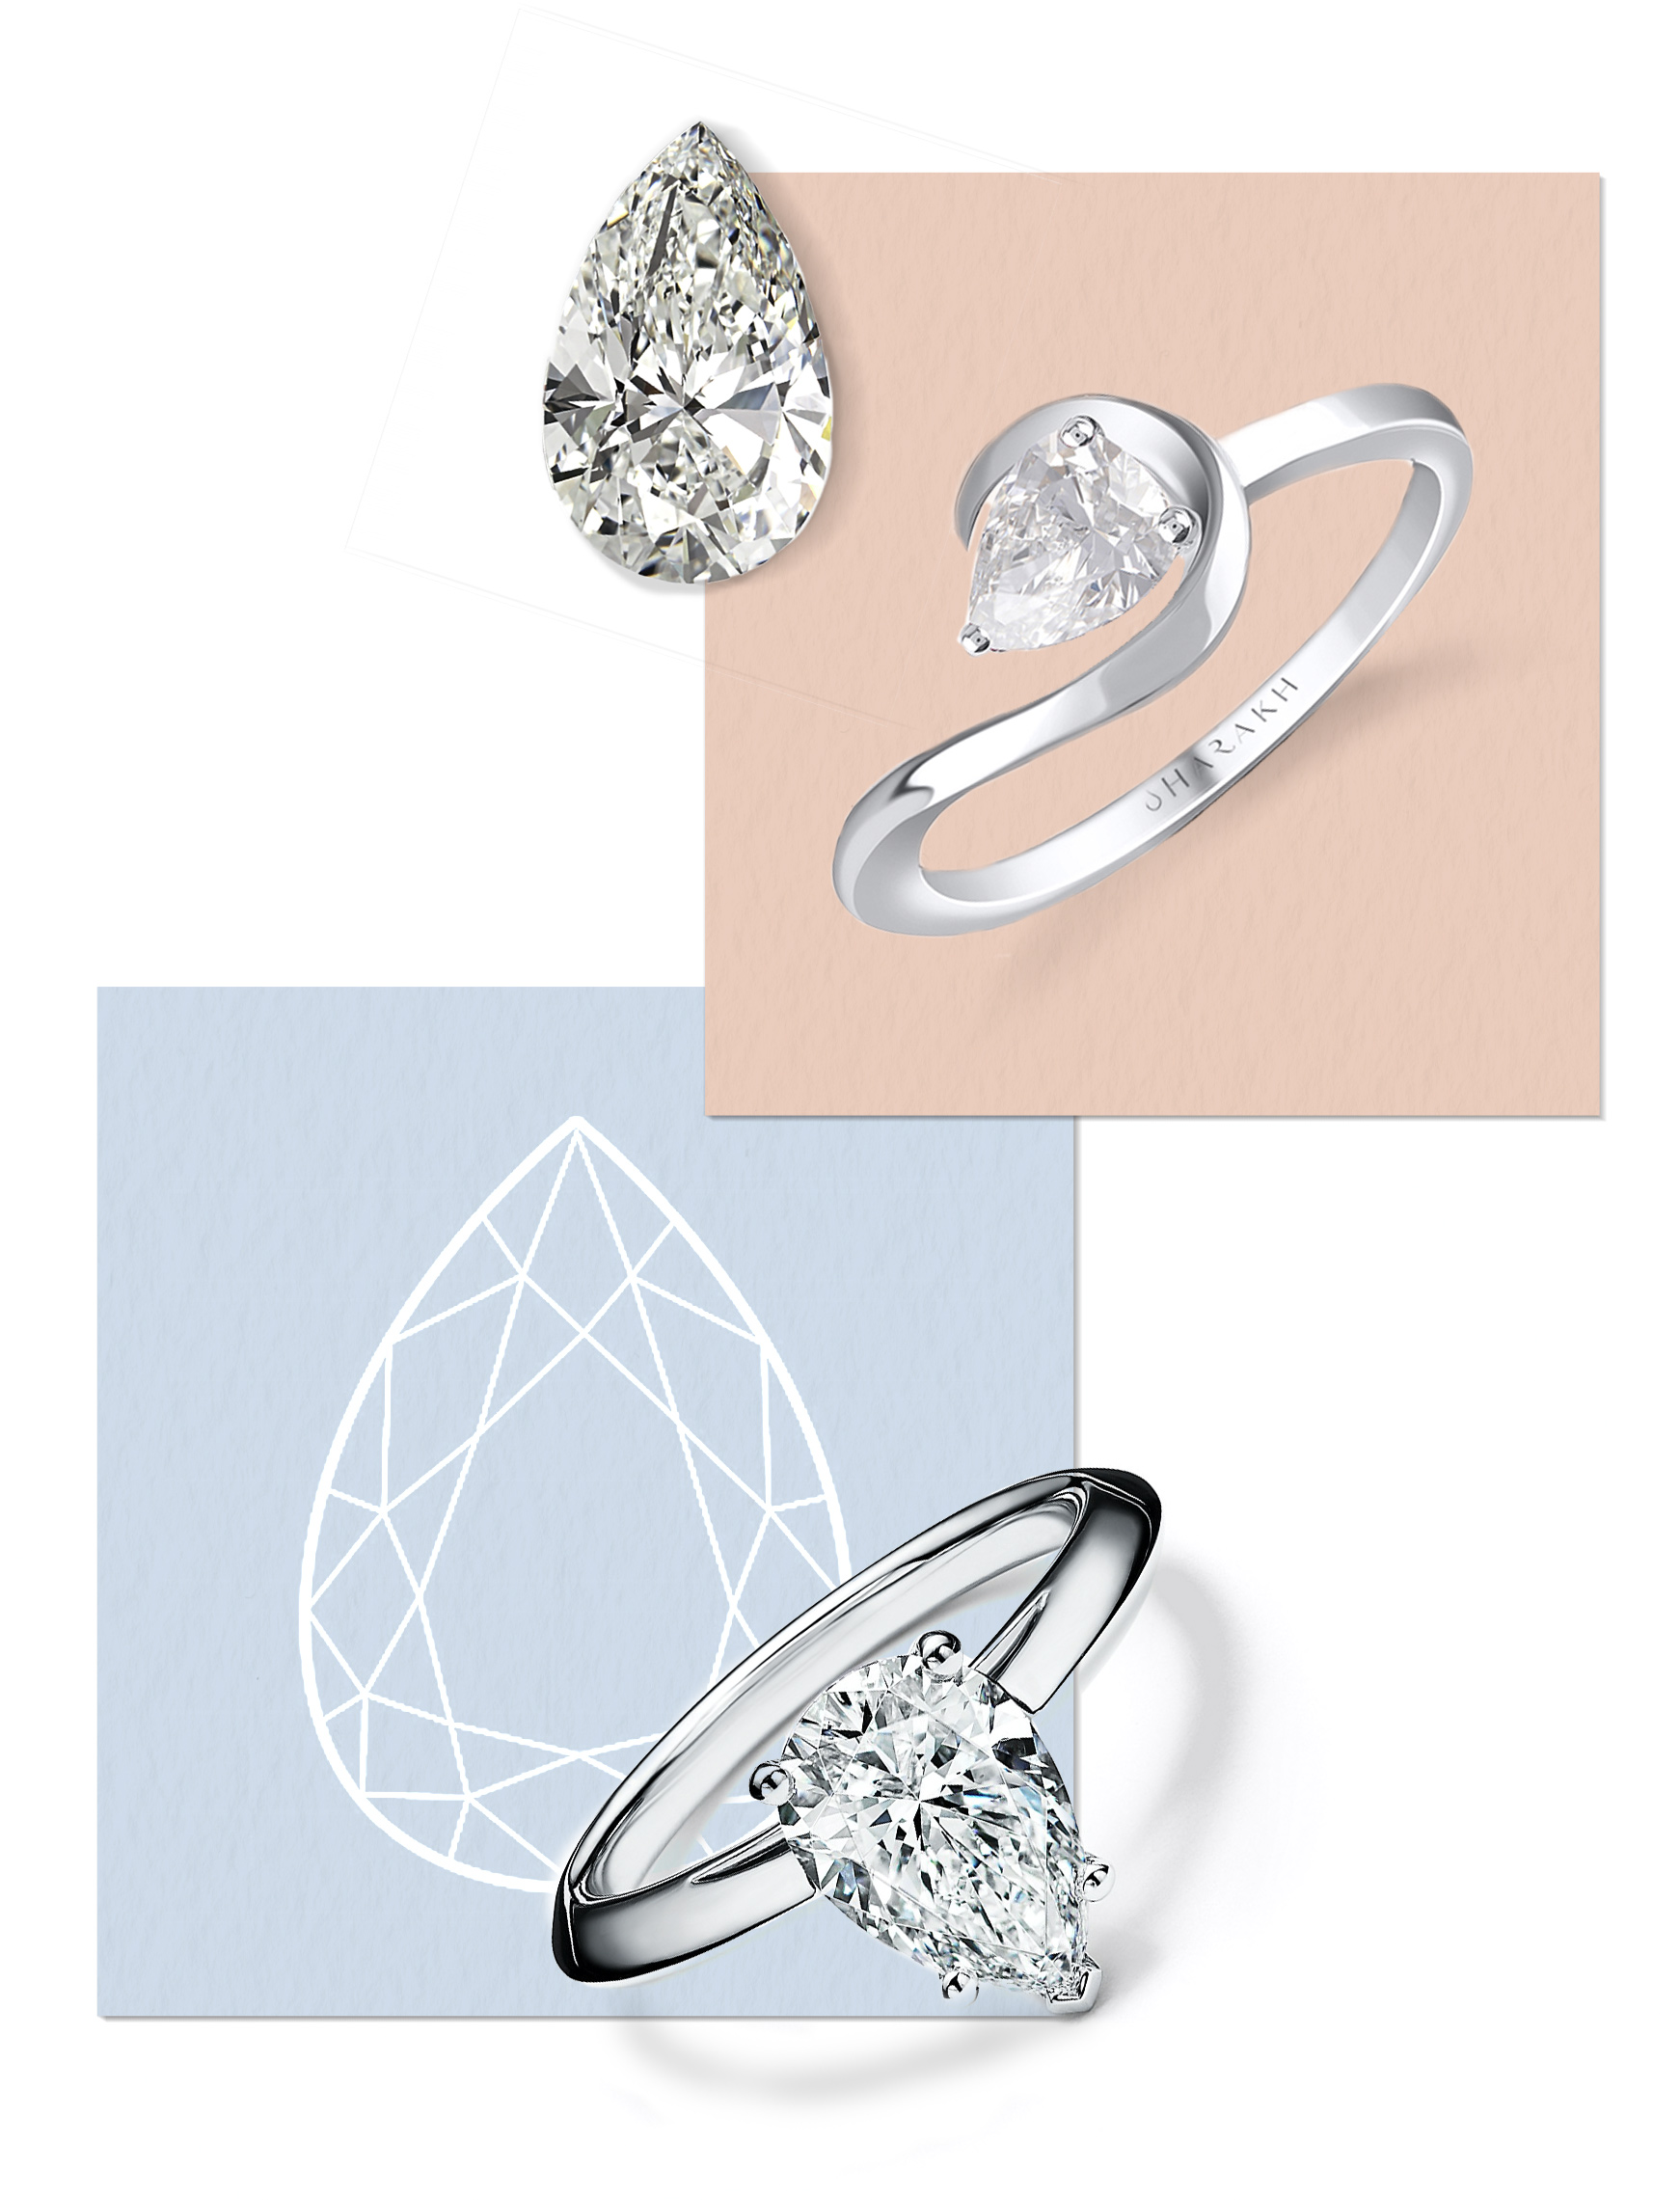 Solitaire diamond rings designed with brilliant-cut pear-shaped diamonds